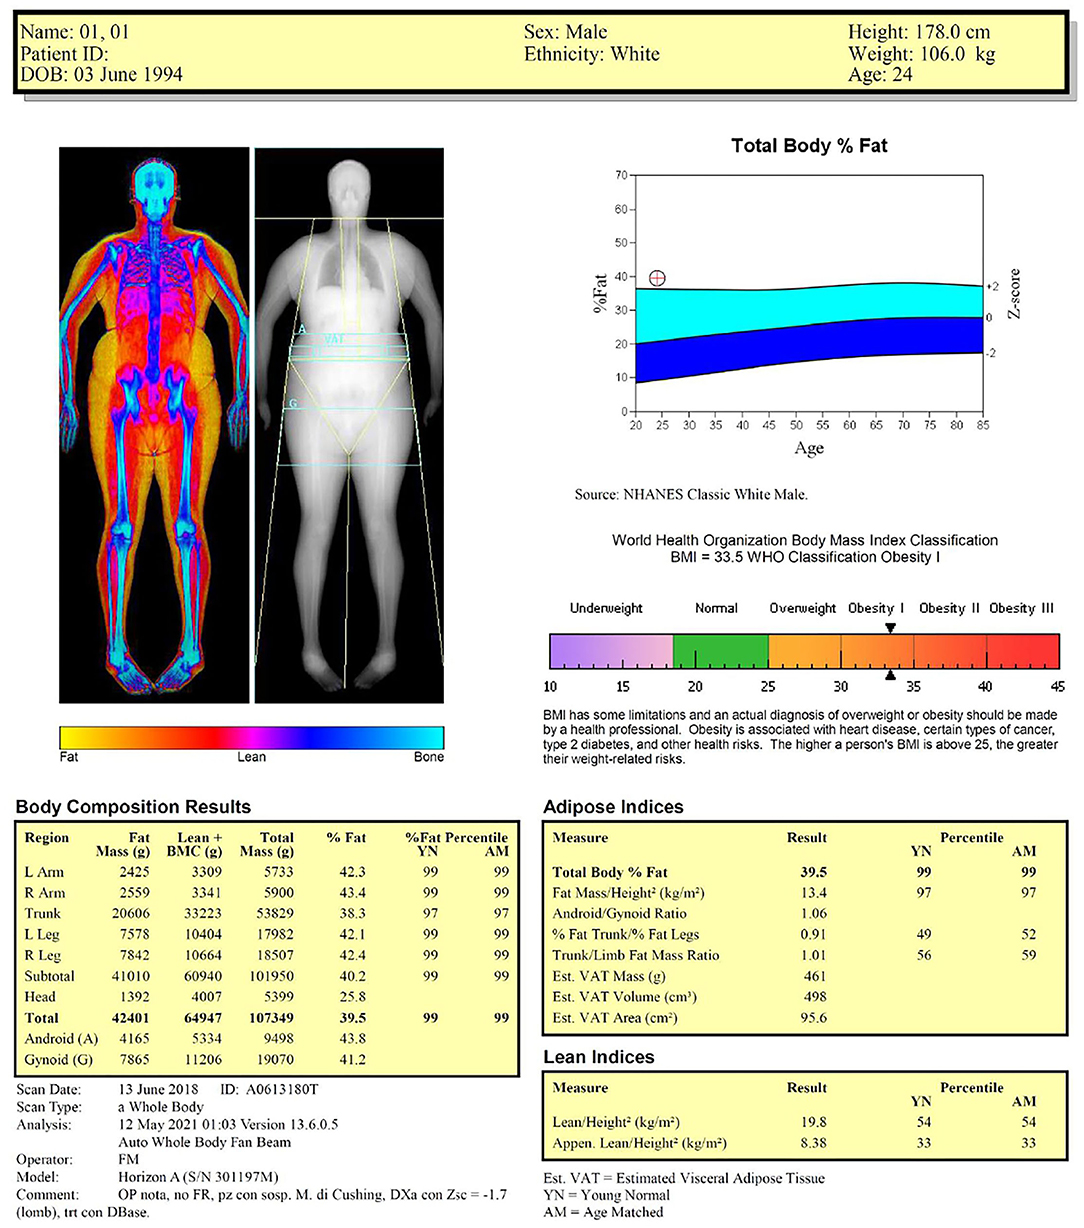 GE Healthcare body composition report sample